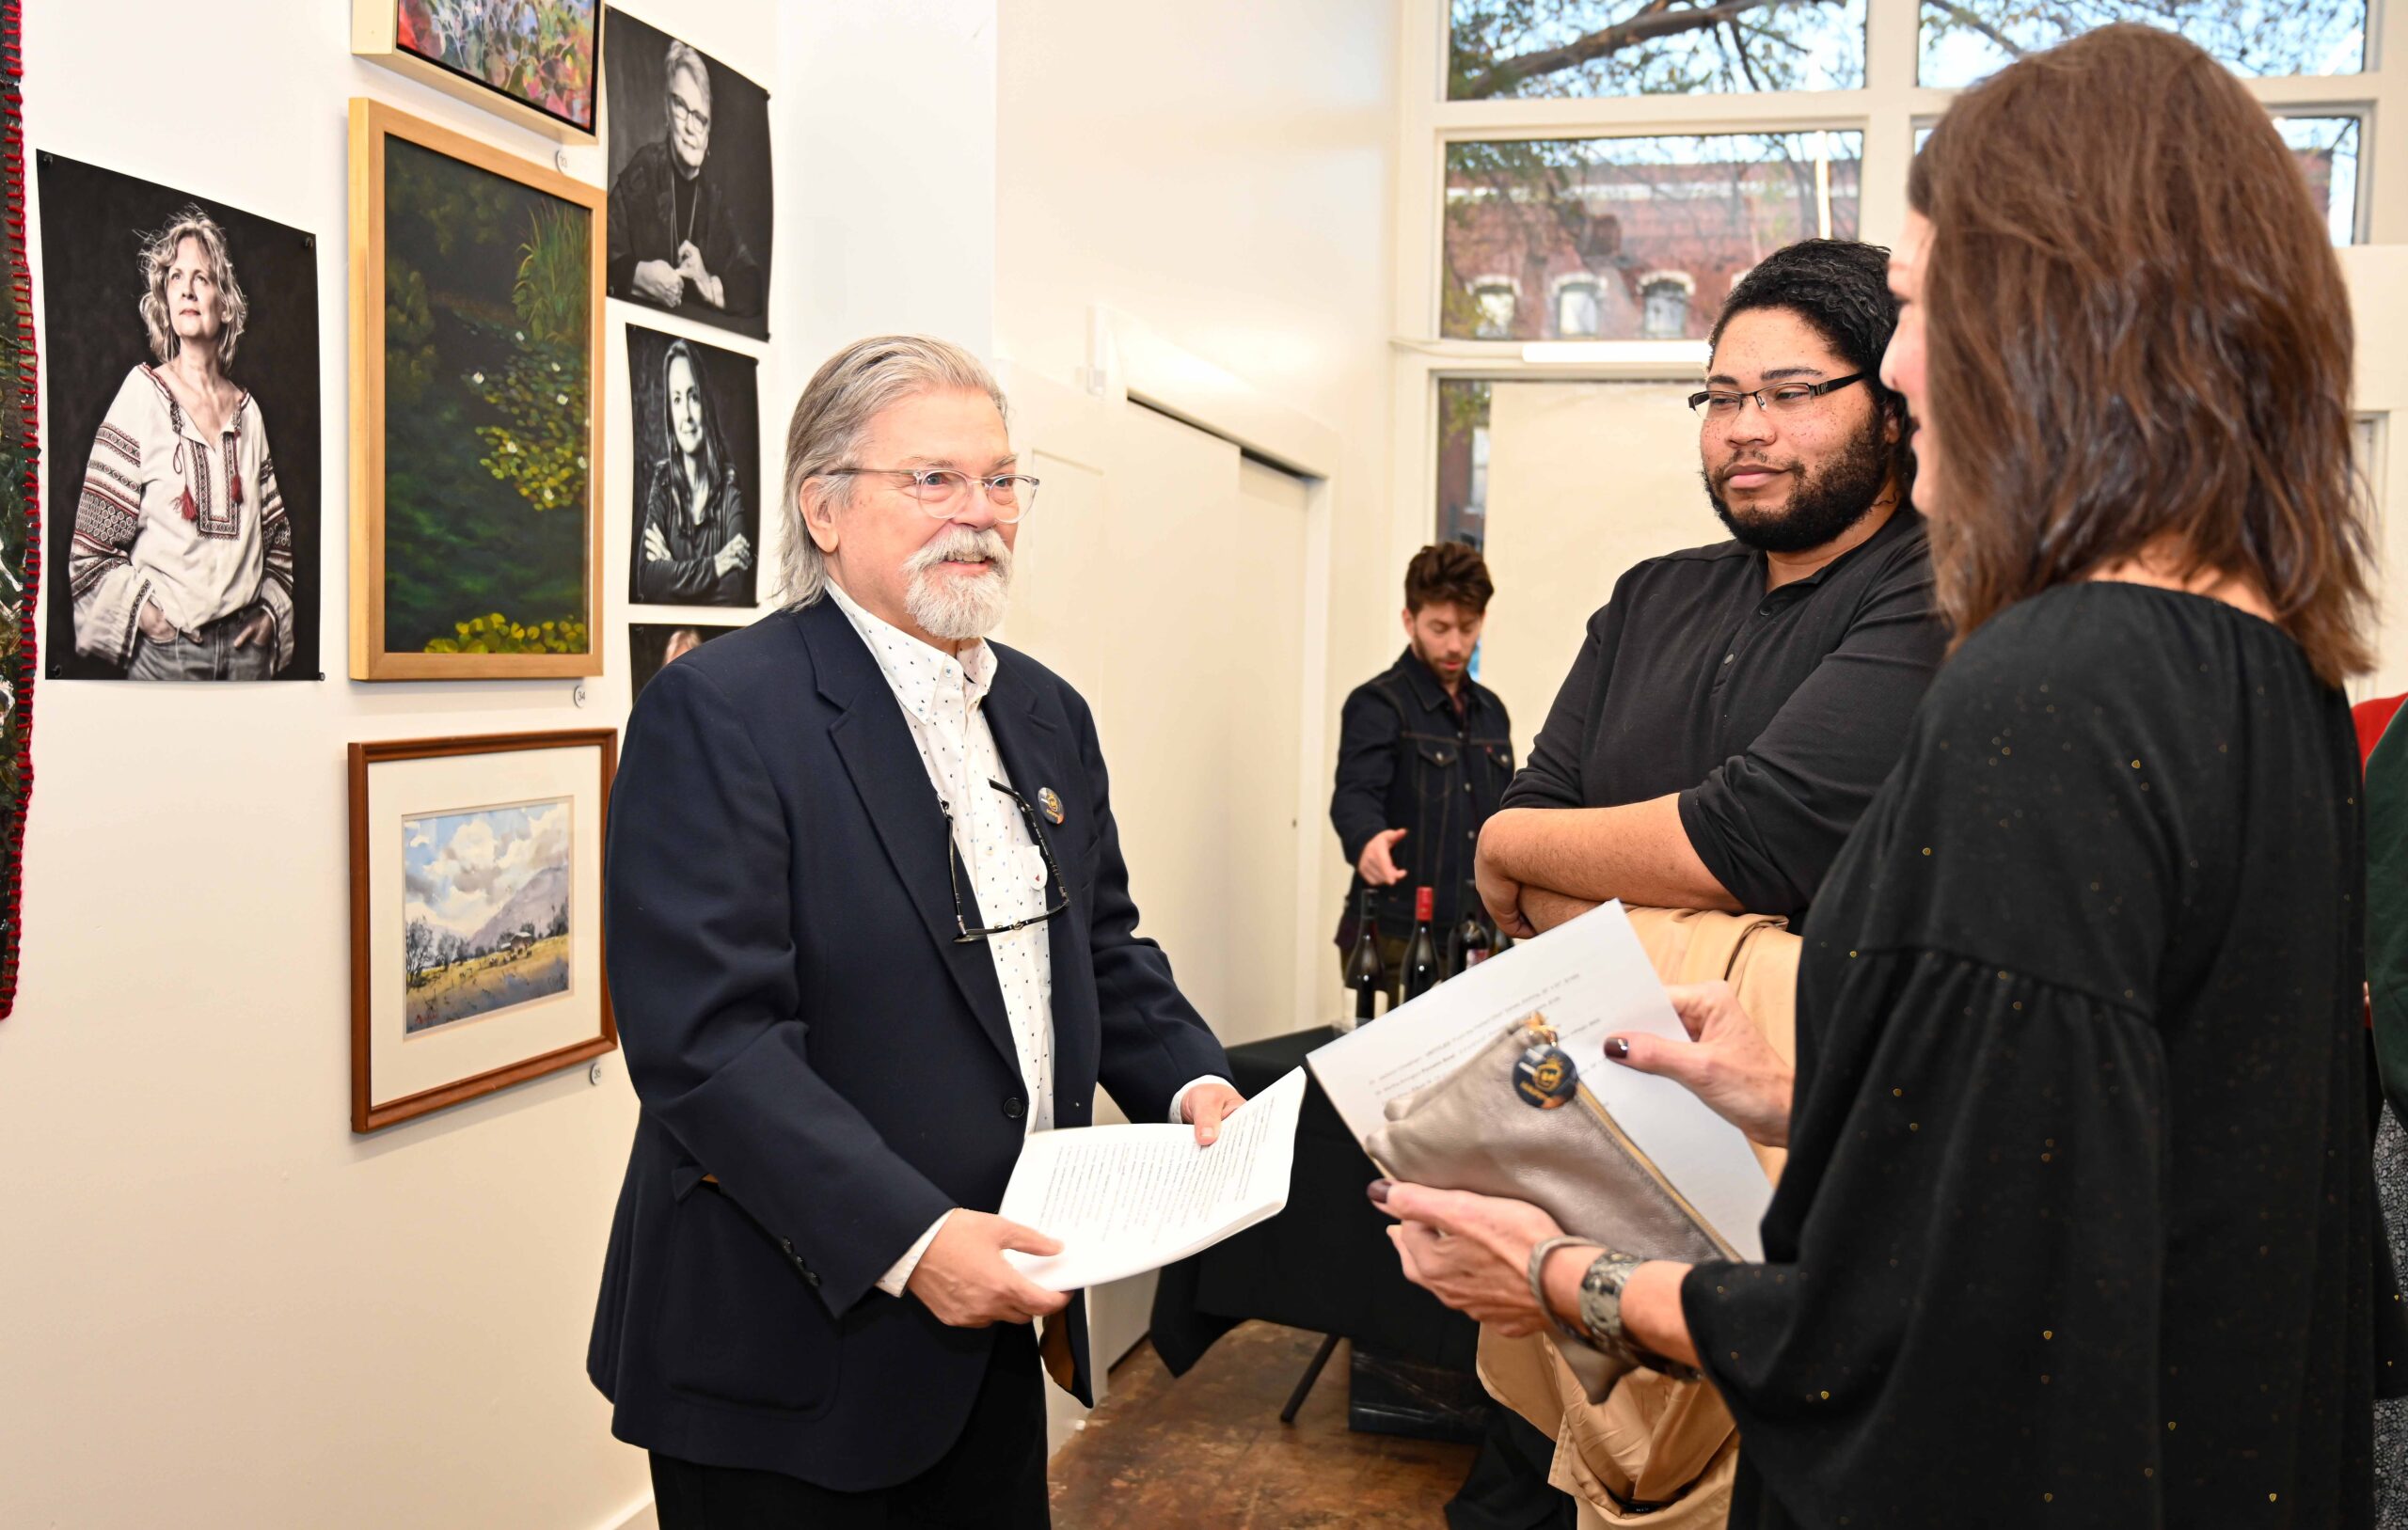 Drake White, an older Caucasian man with a white beard, longer gray hair (slicked back). He is wearing glasses, a navy blue tweed suit jacket and white shirt. He is standing in a gallery featuring his Photographic portraits of Augusta Artists. He is talking to Leslie Hamrick, a Caucasian woman with shoulder length brown hair dressed in black and Devon Lovitt, an African American male with long curly hair and glasses also wearing black.